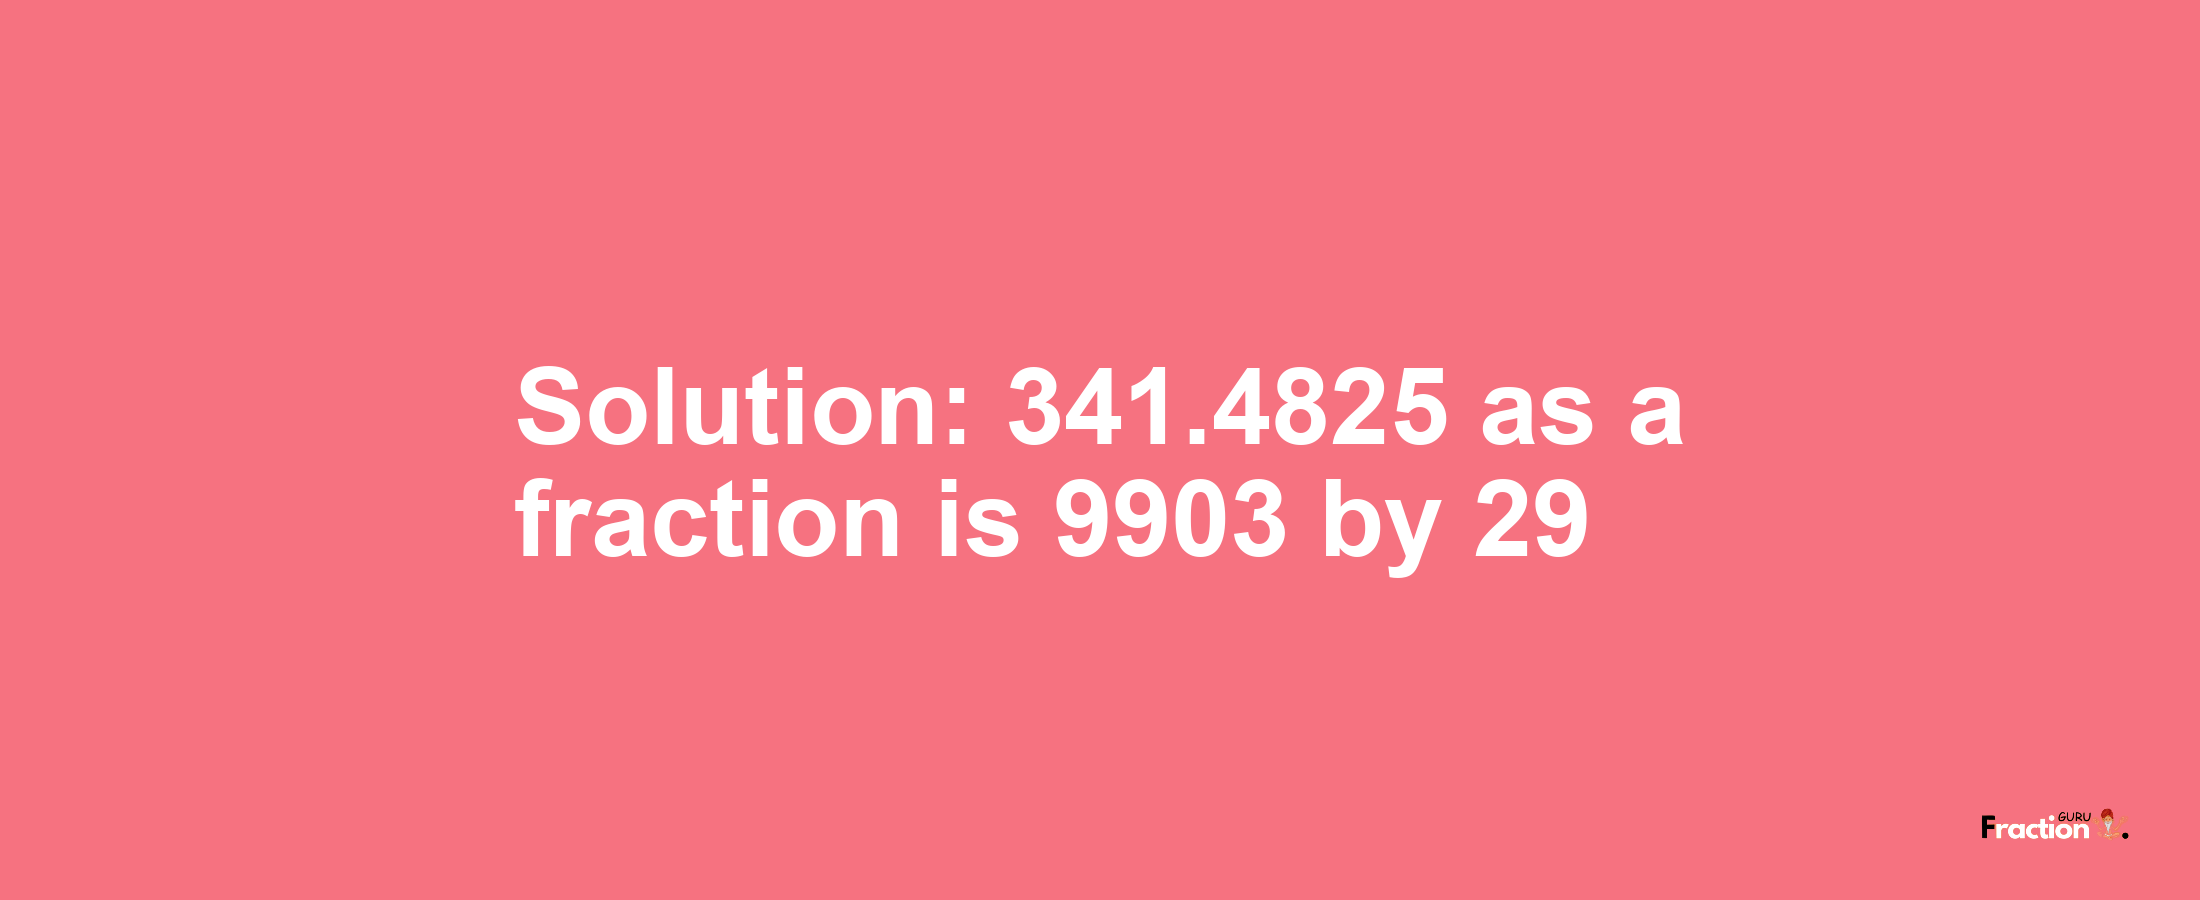 Solution:341.4825 as a fraction is 9903/29